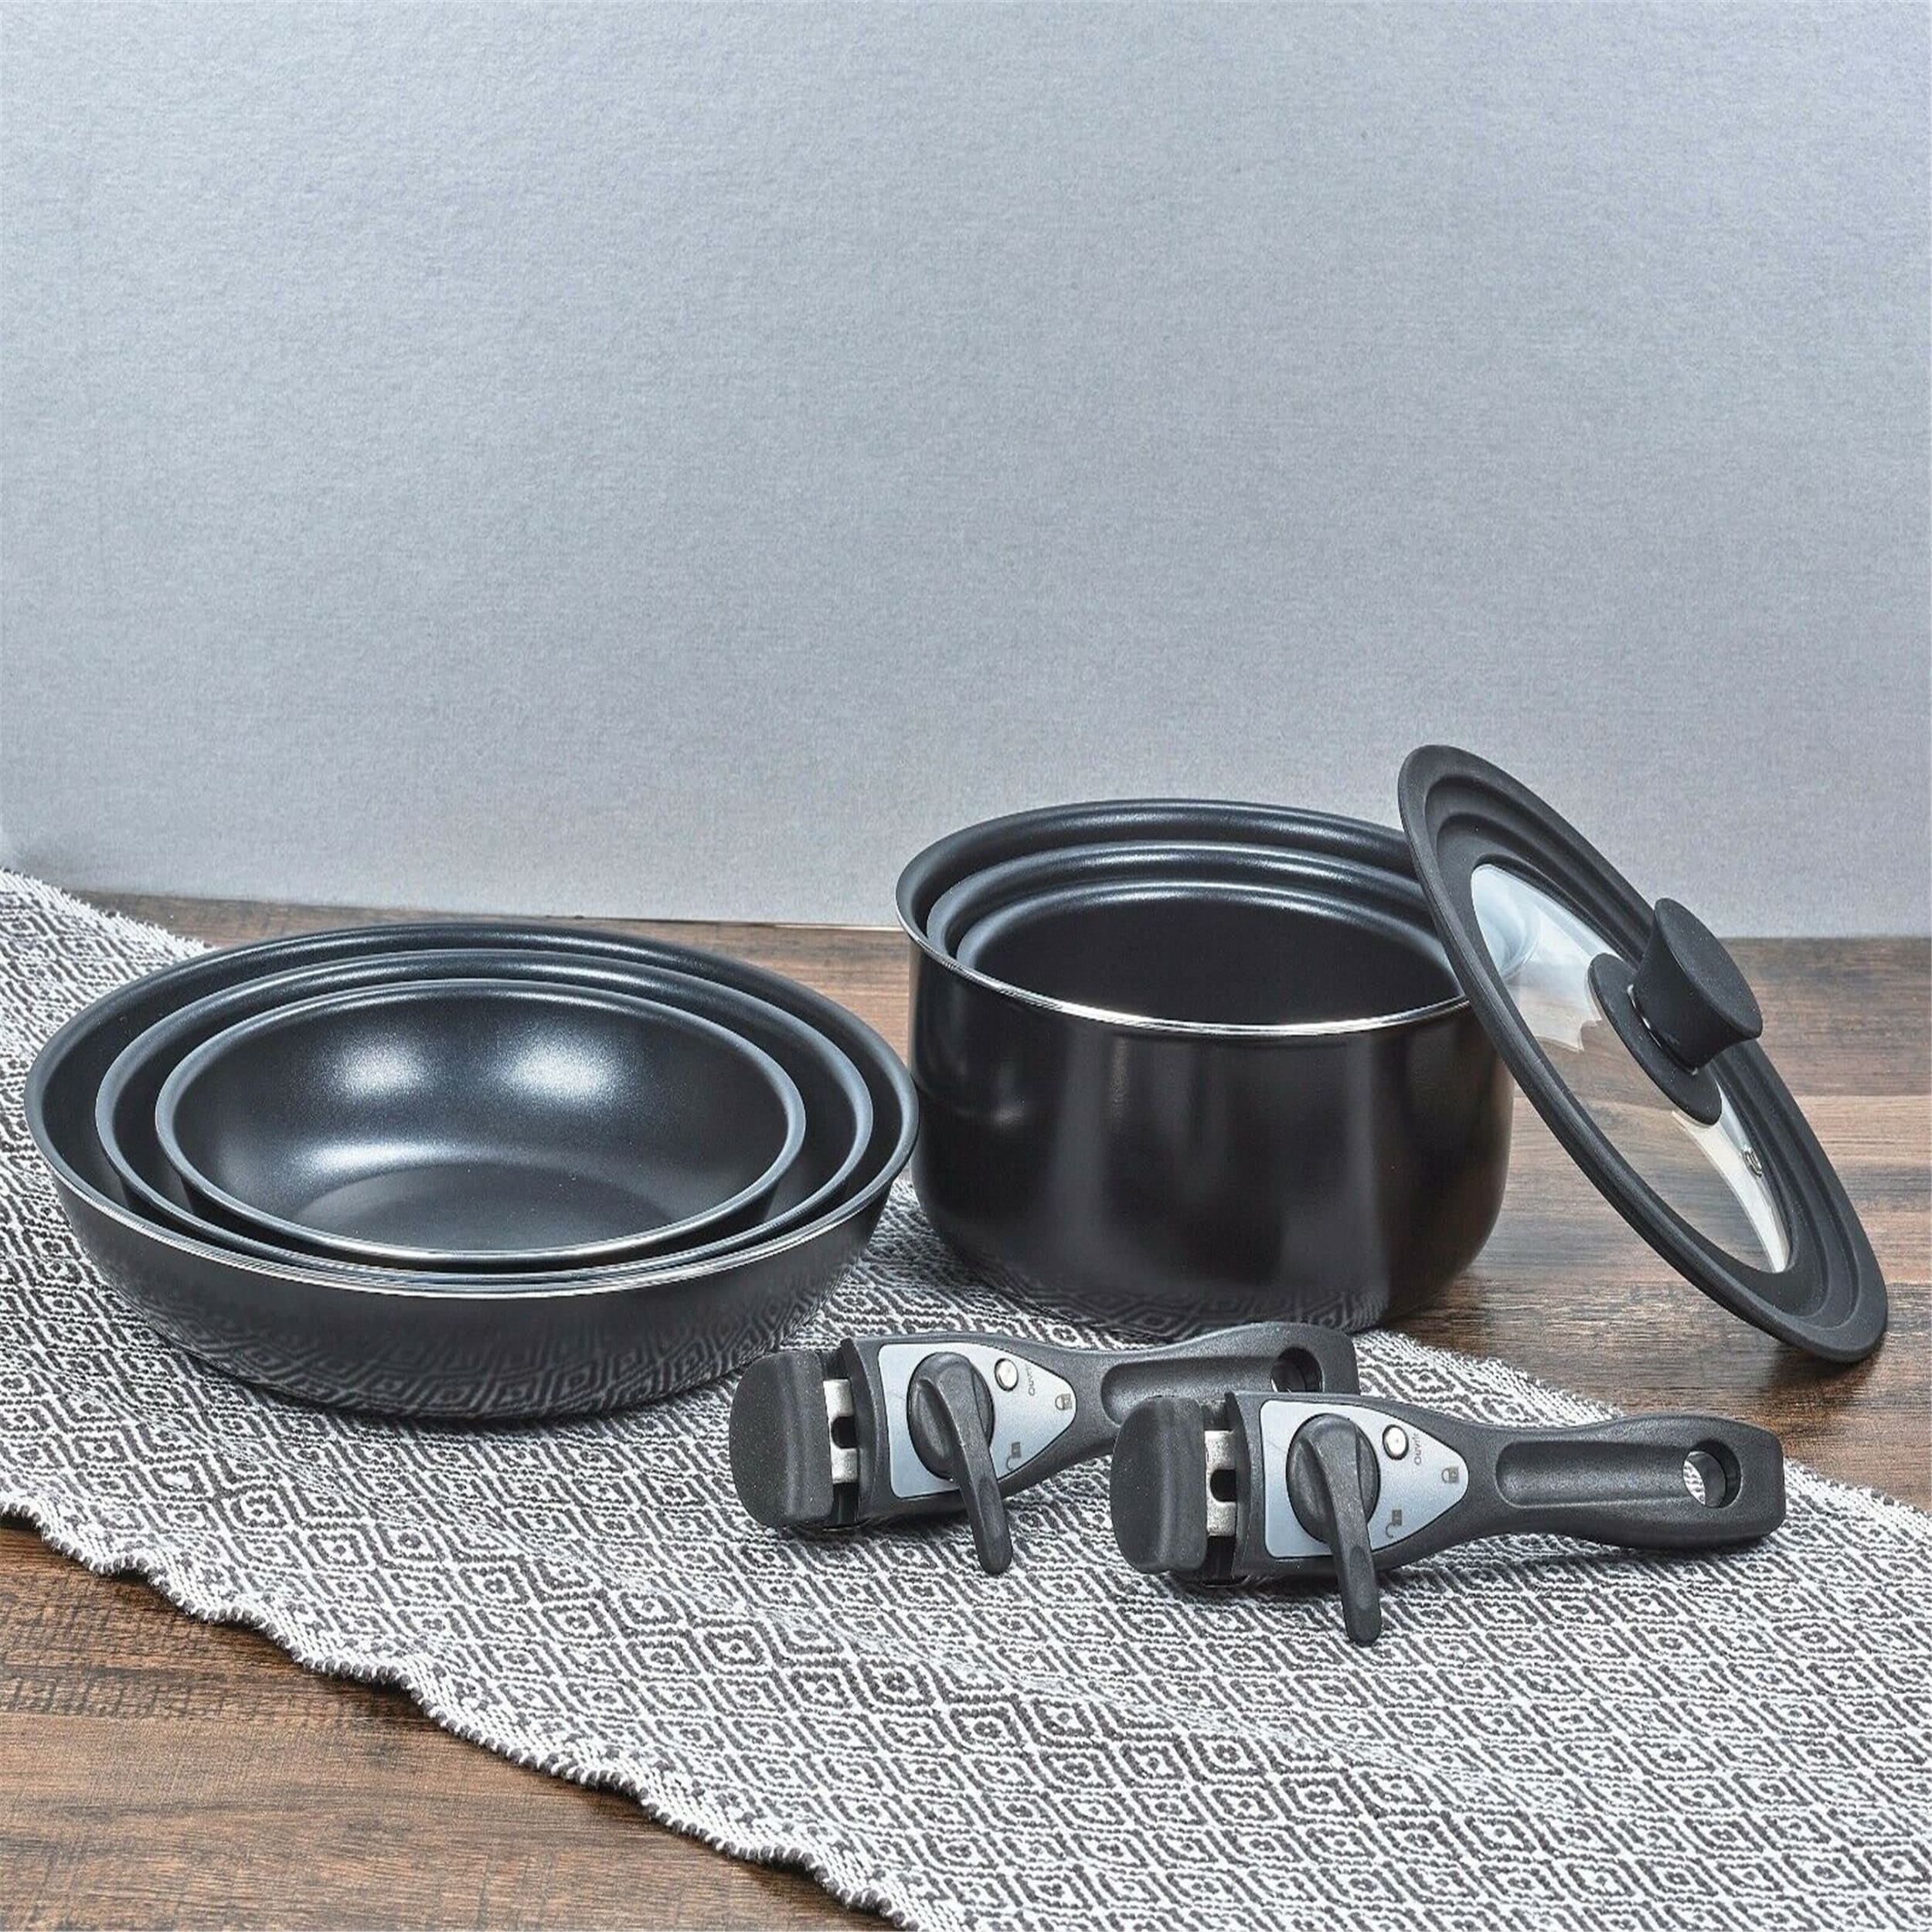 https://ak1.ostkcdn.com/images/products/is/images/direct/e9179c13e6e84e5bfd7e5fa8b8796e75caad0ec9/9-Piece-Ceramic-Cookware-Pans-Pots-Set-with-Detachable-Handle-and-Lid-Induction.jpg